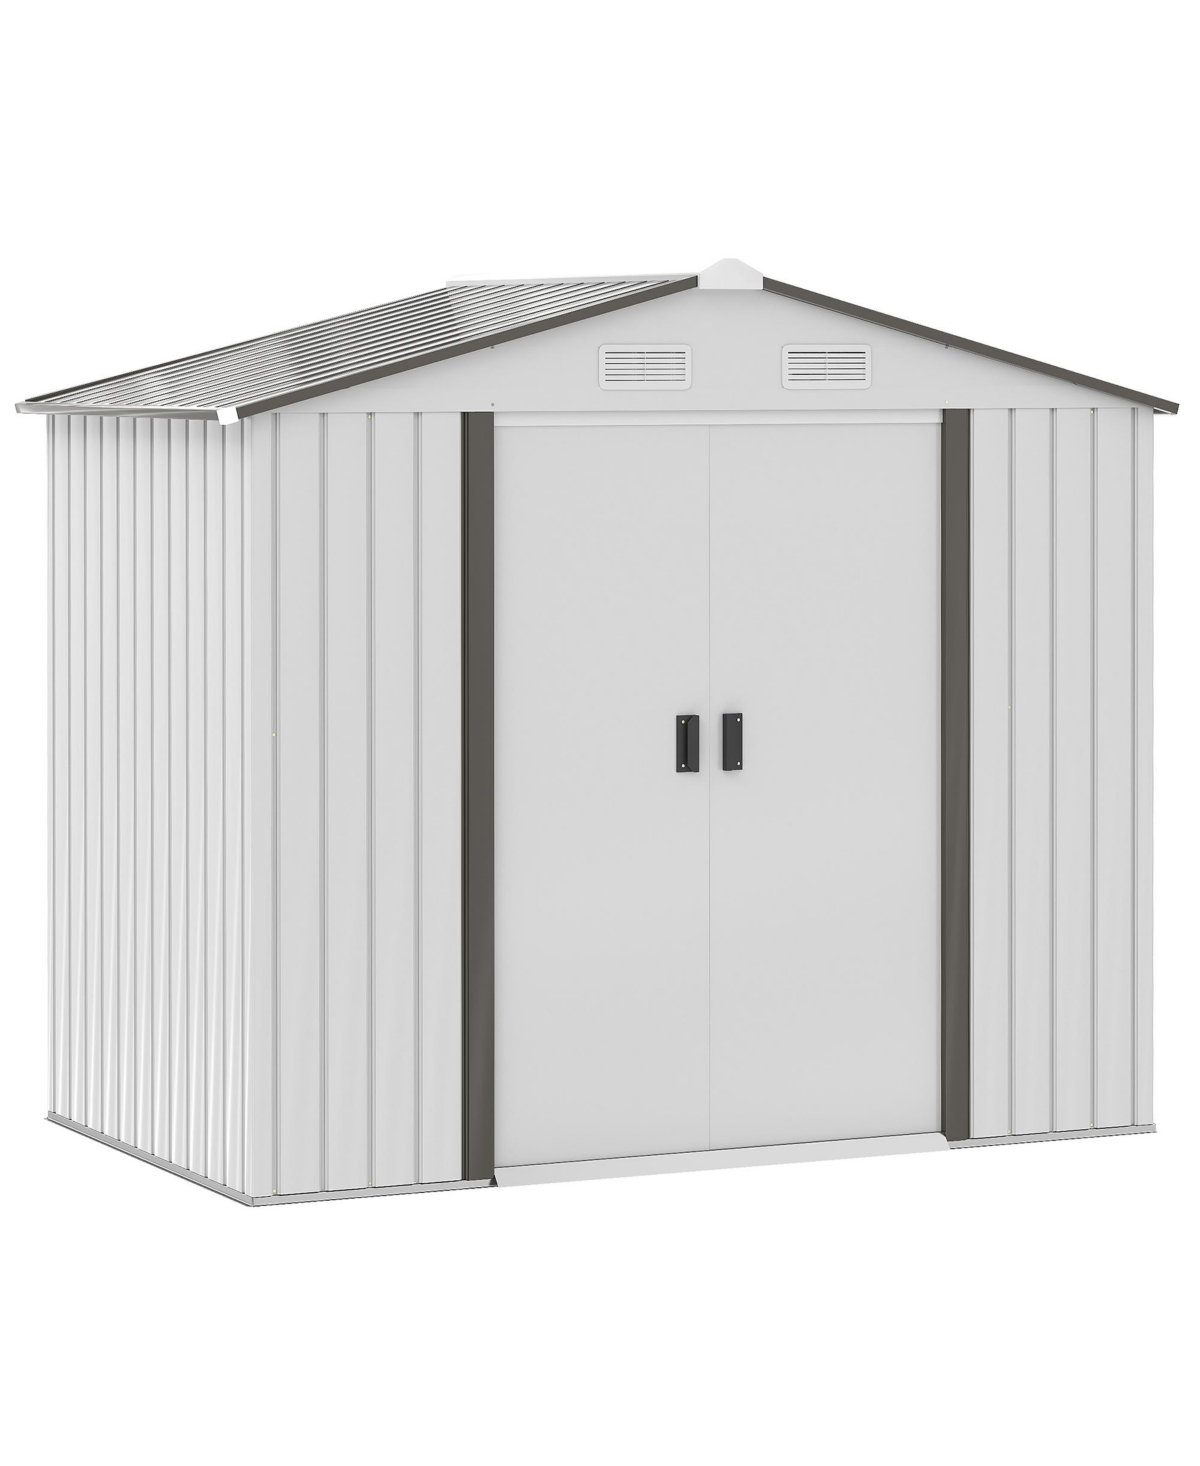 7' x 4' Steel Storage Shed Organizer, Garden Tool house with 4 Vents and 2 Easy Sliding Doors for Backyard, Patio, Garage, Lawn, White - Whit